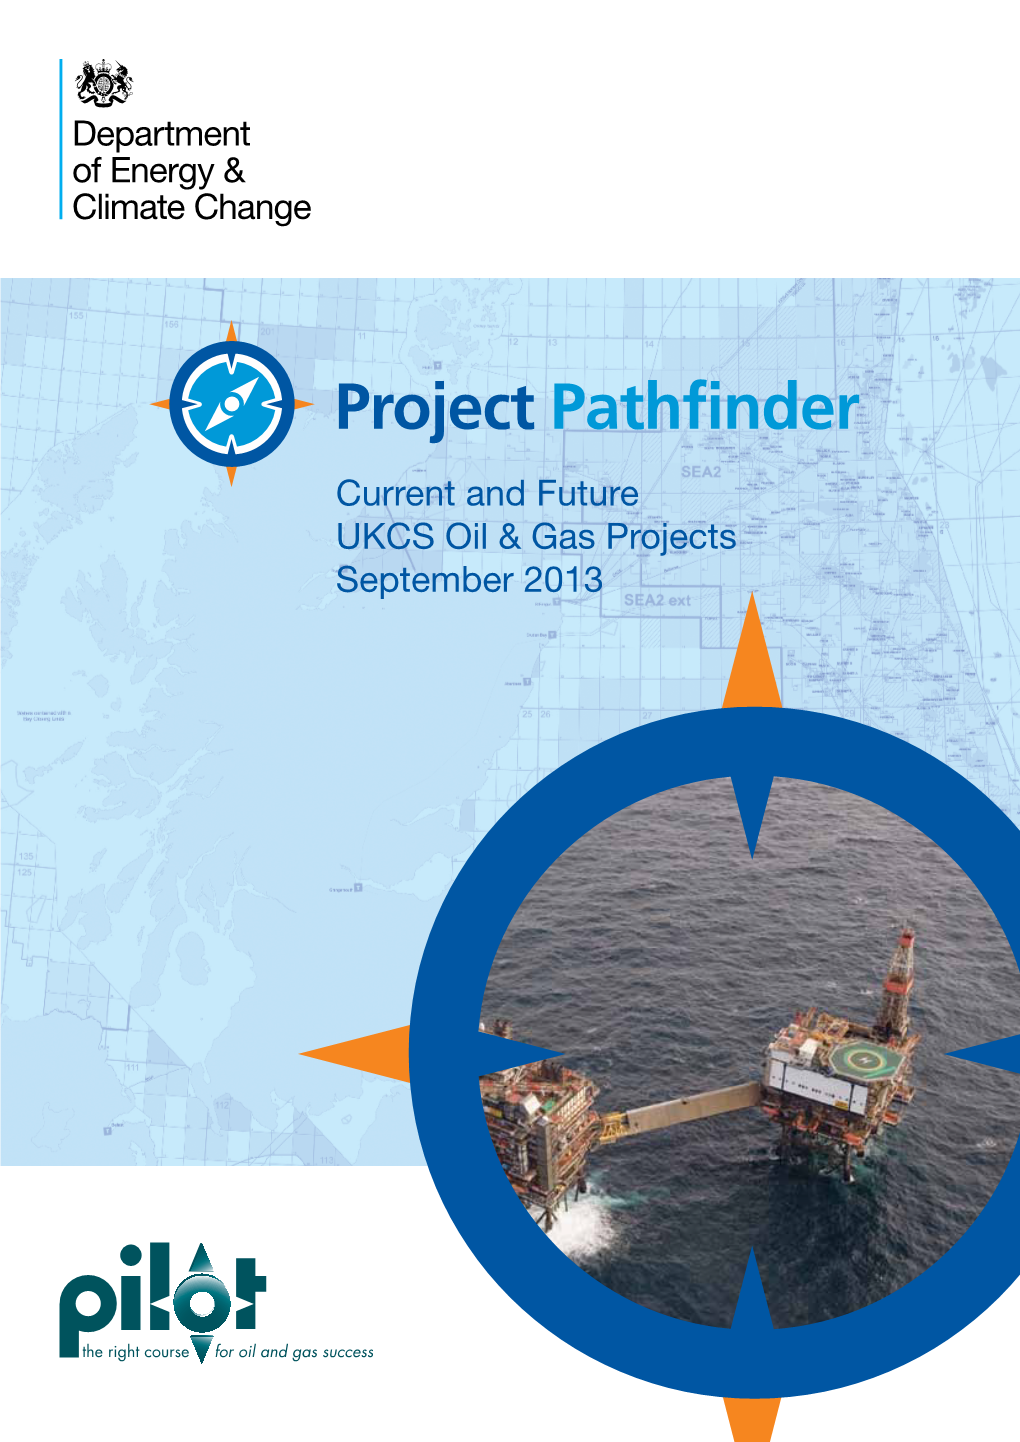 Current and Future UKCS Oil & Gas Projects September 2013